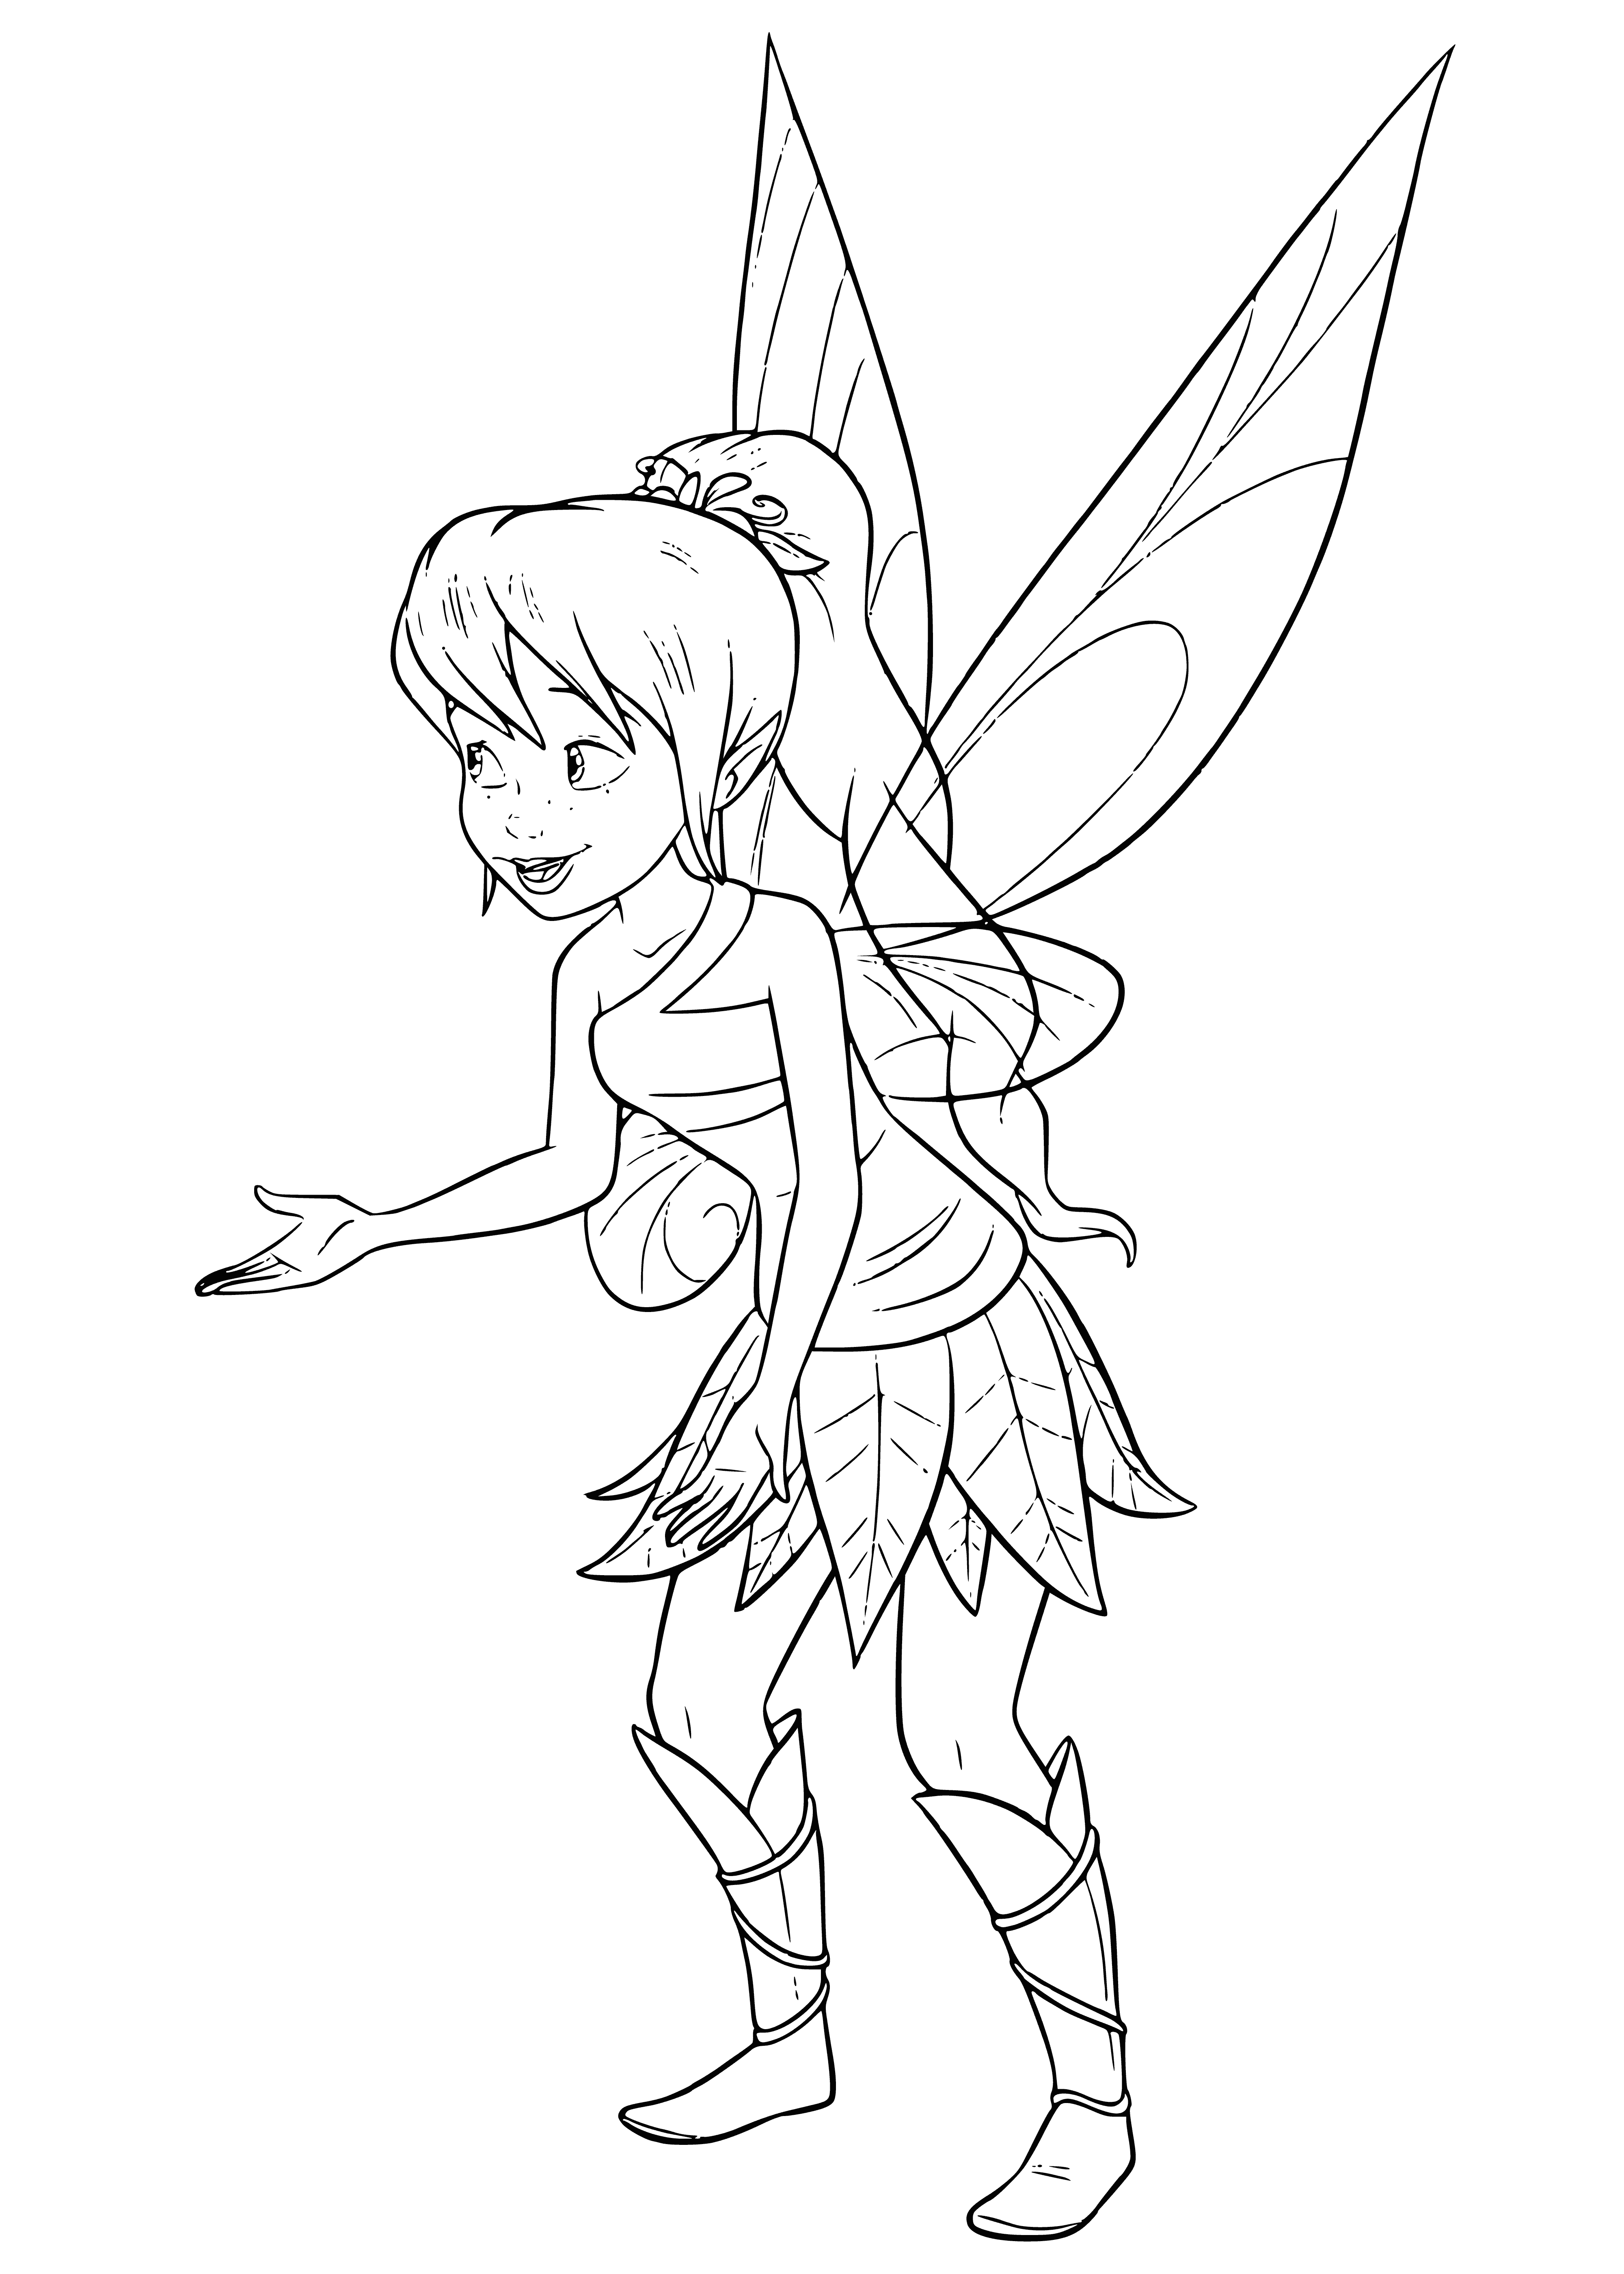 Fairy Fauna coloring page